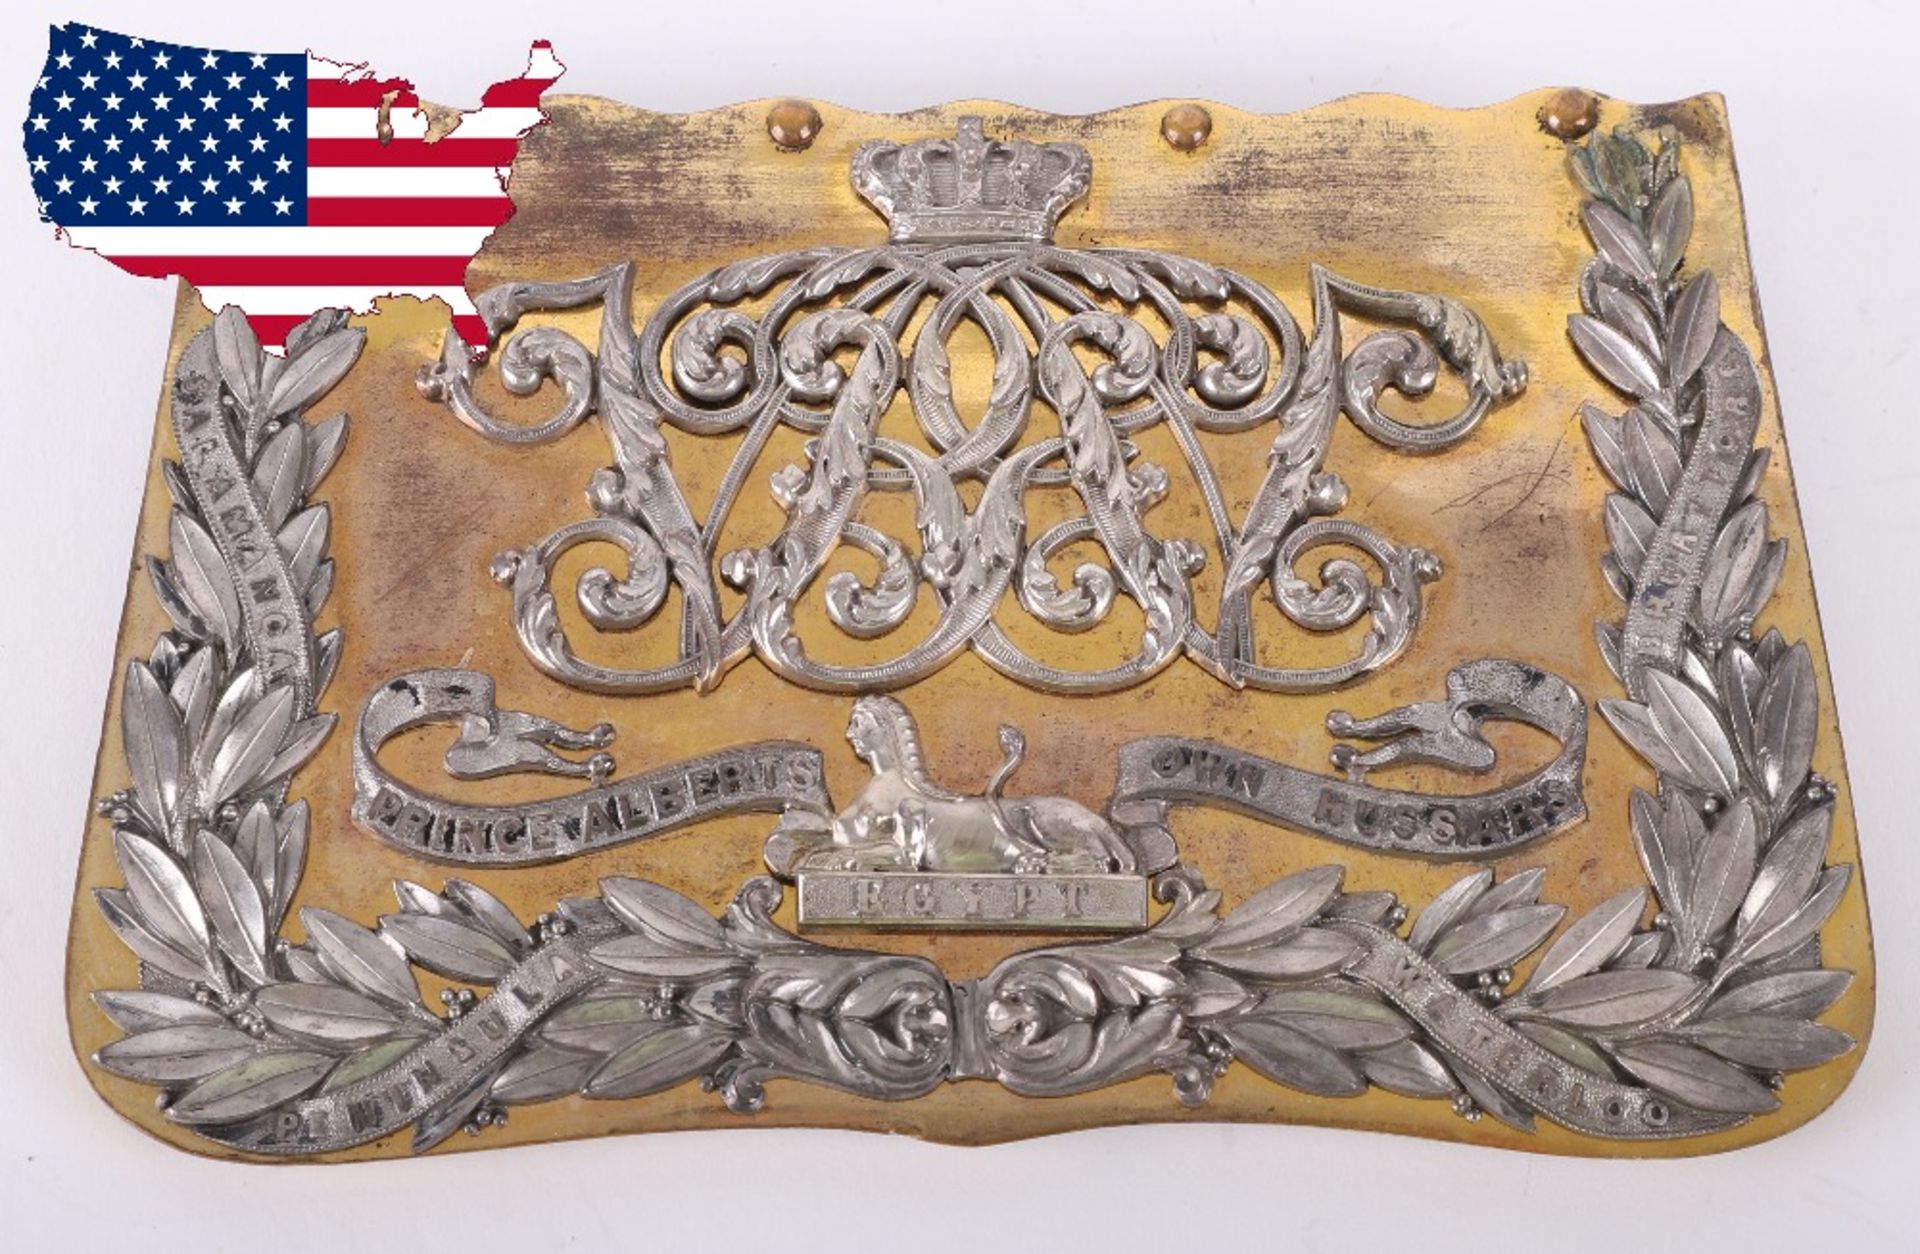 Pre 1855 Officer’s Pouch Flap of the 11th Prince Albert’s Own Hussars